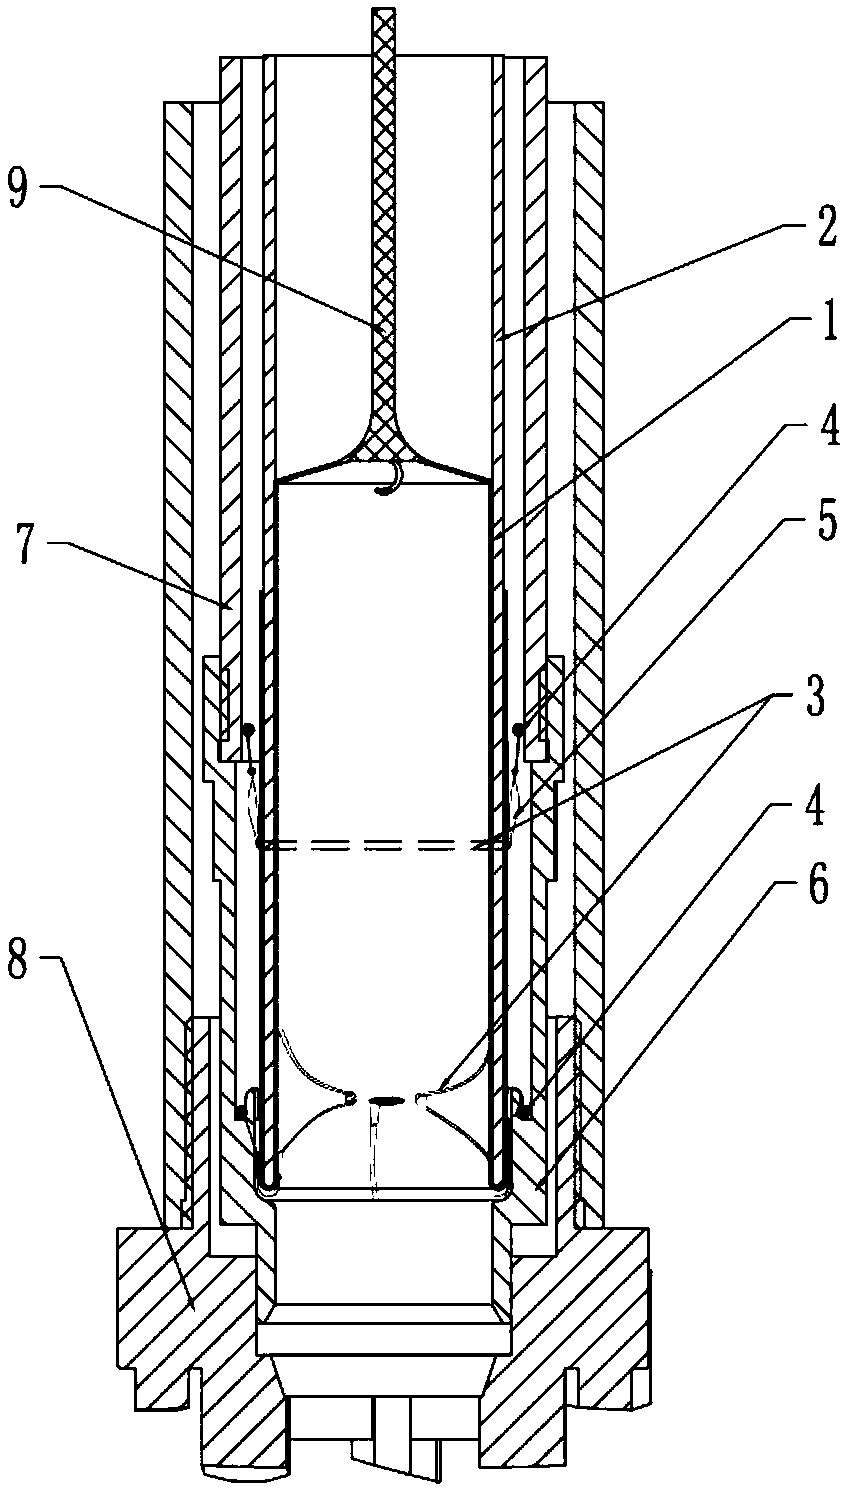 Sealing assembly with comb-tooth-shaped limiting device for core-taking soft bag